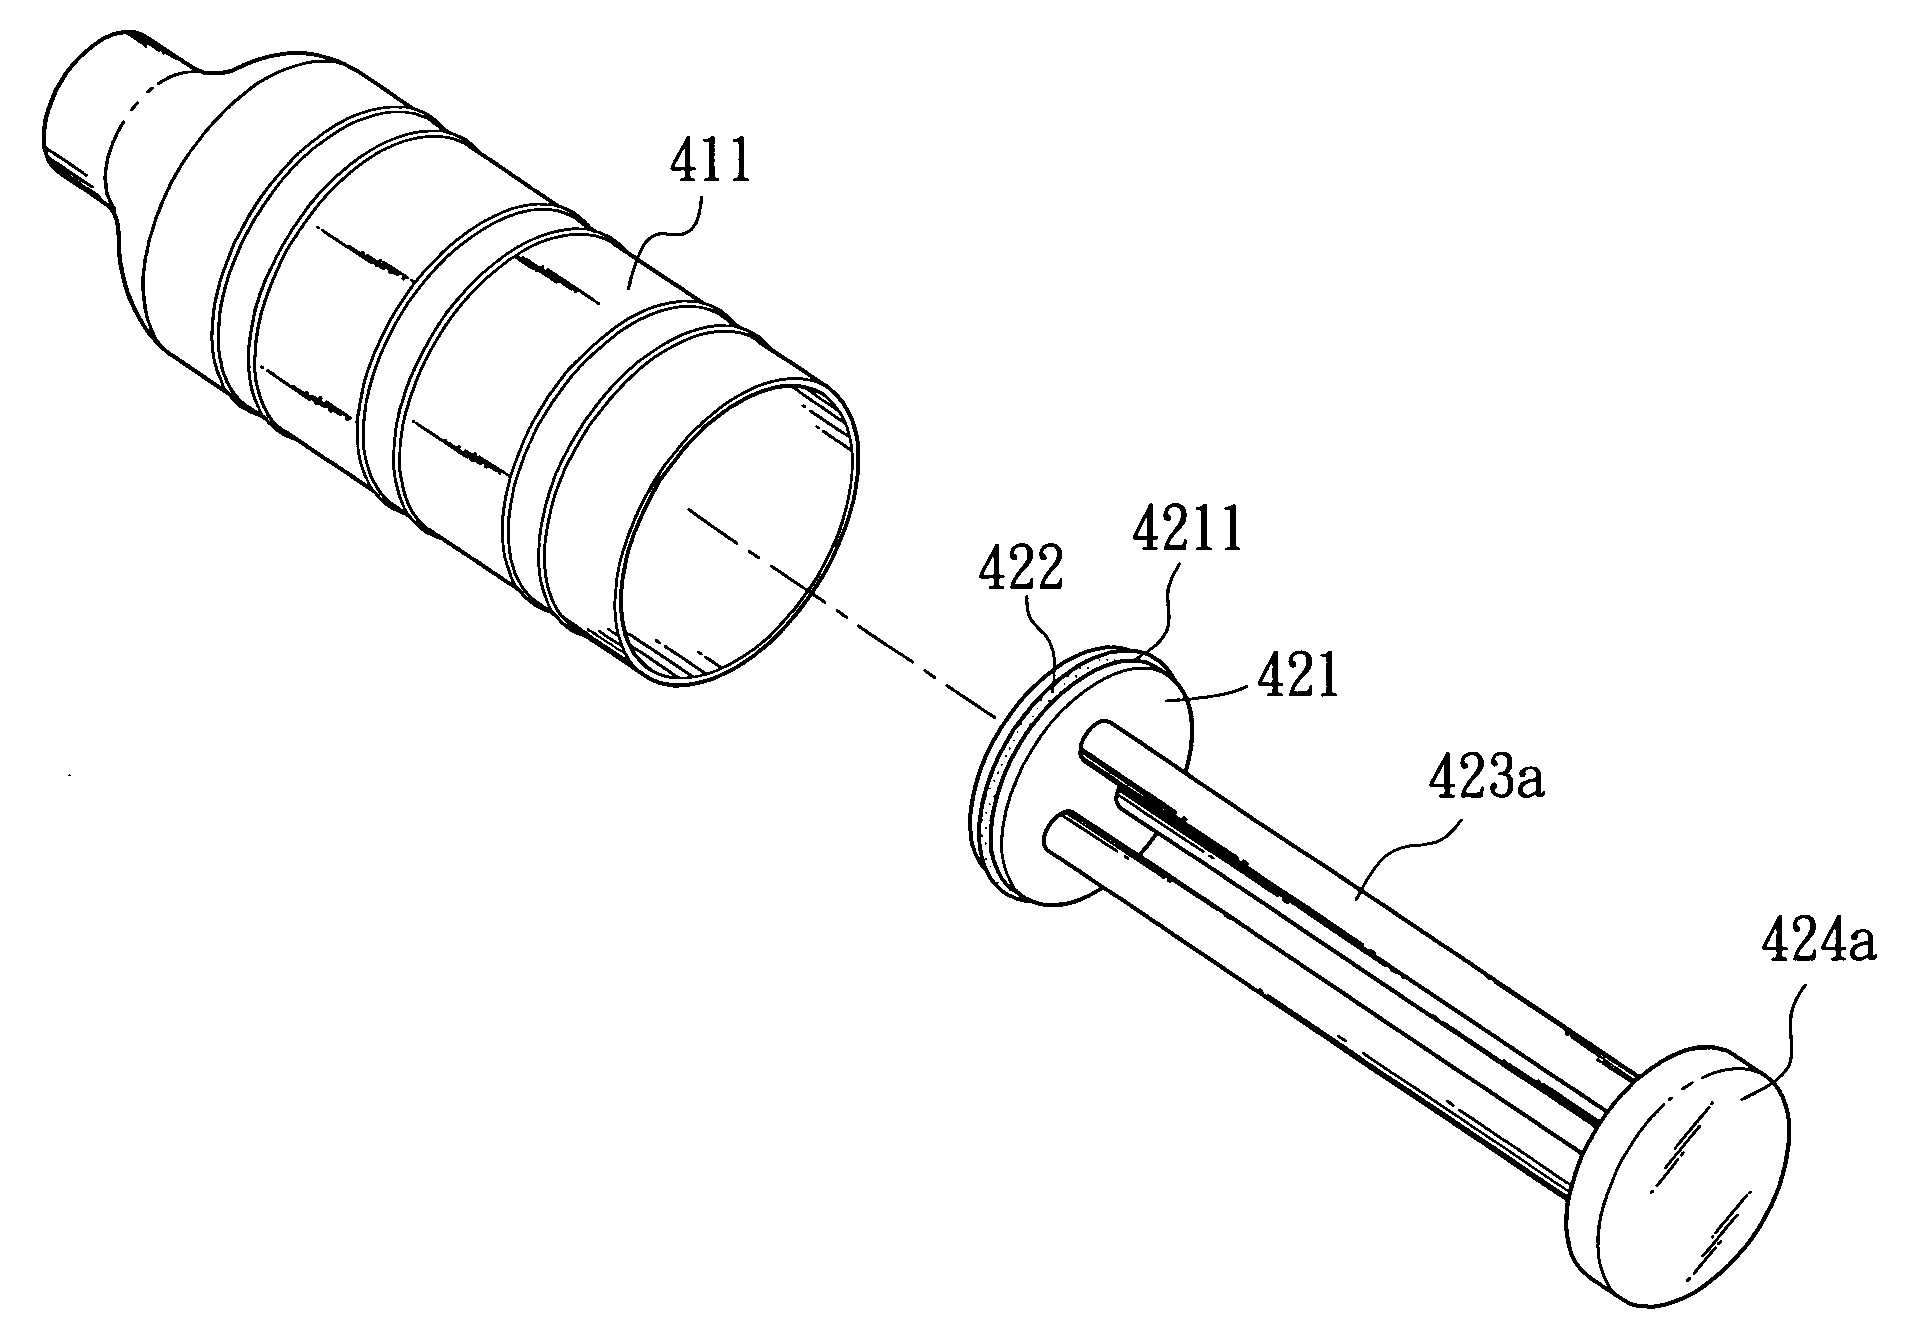 Silicon breast implant injector for augmentation mammaplasty